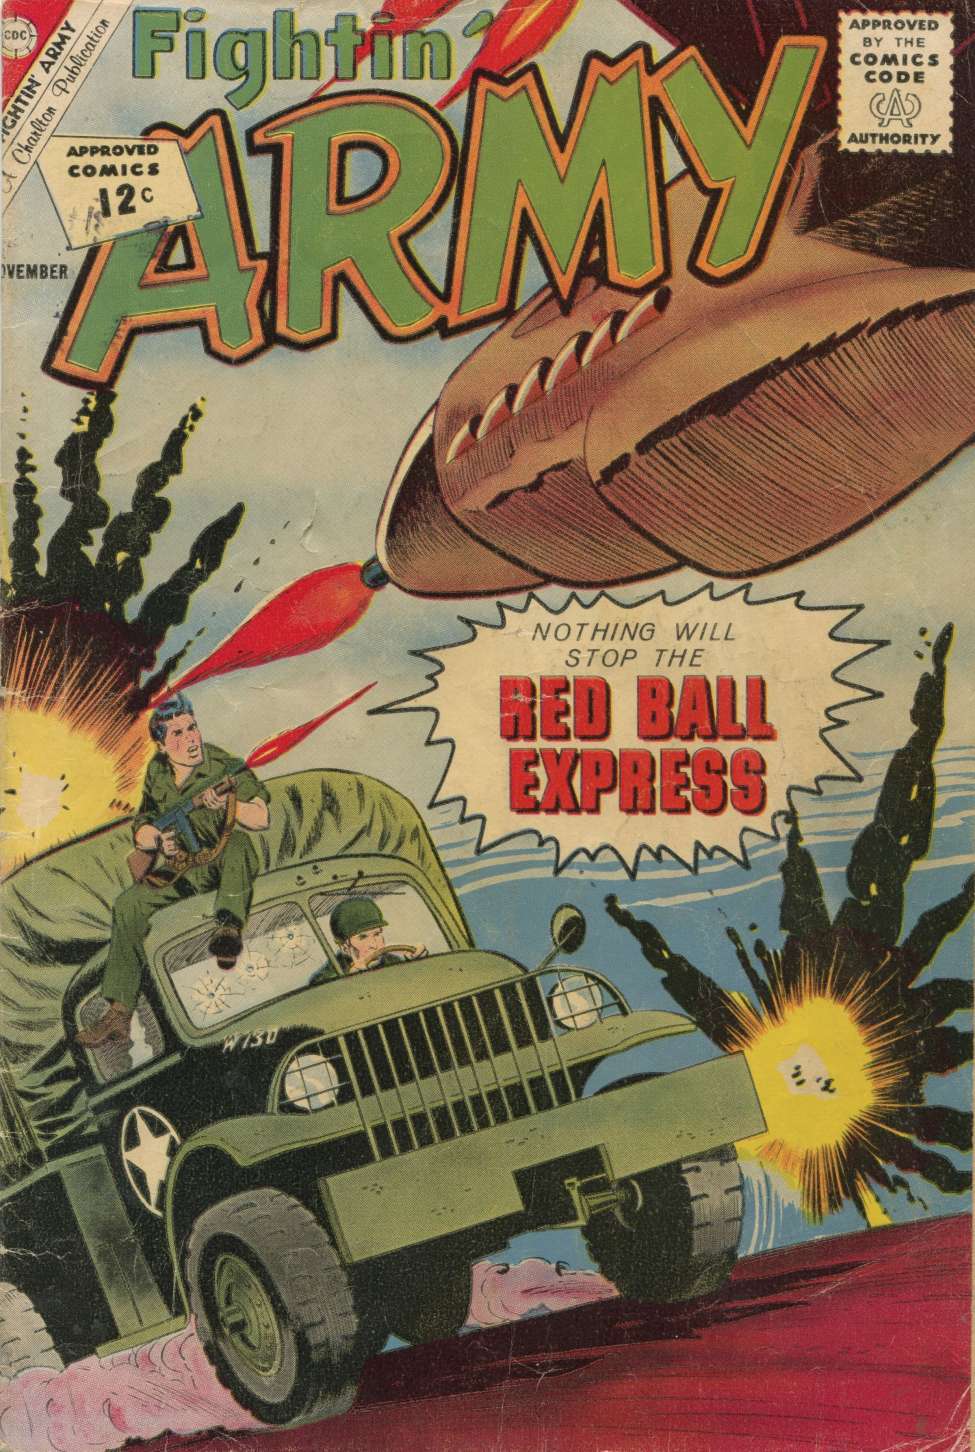 Book Cover For Fightin' Army 49